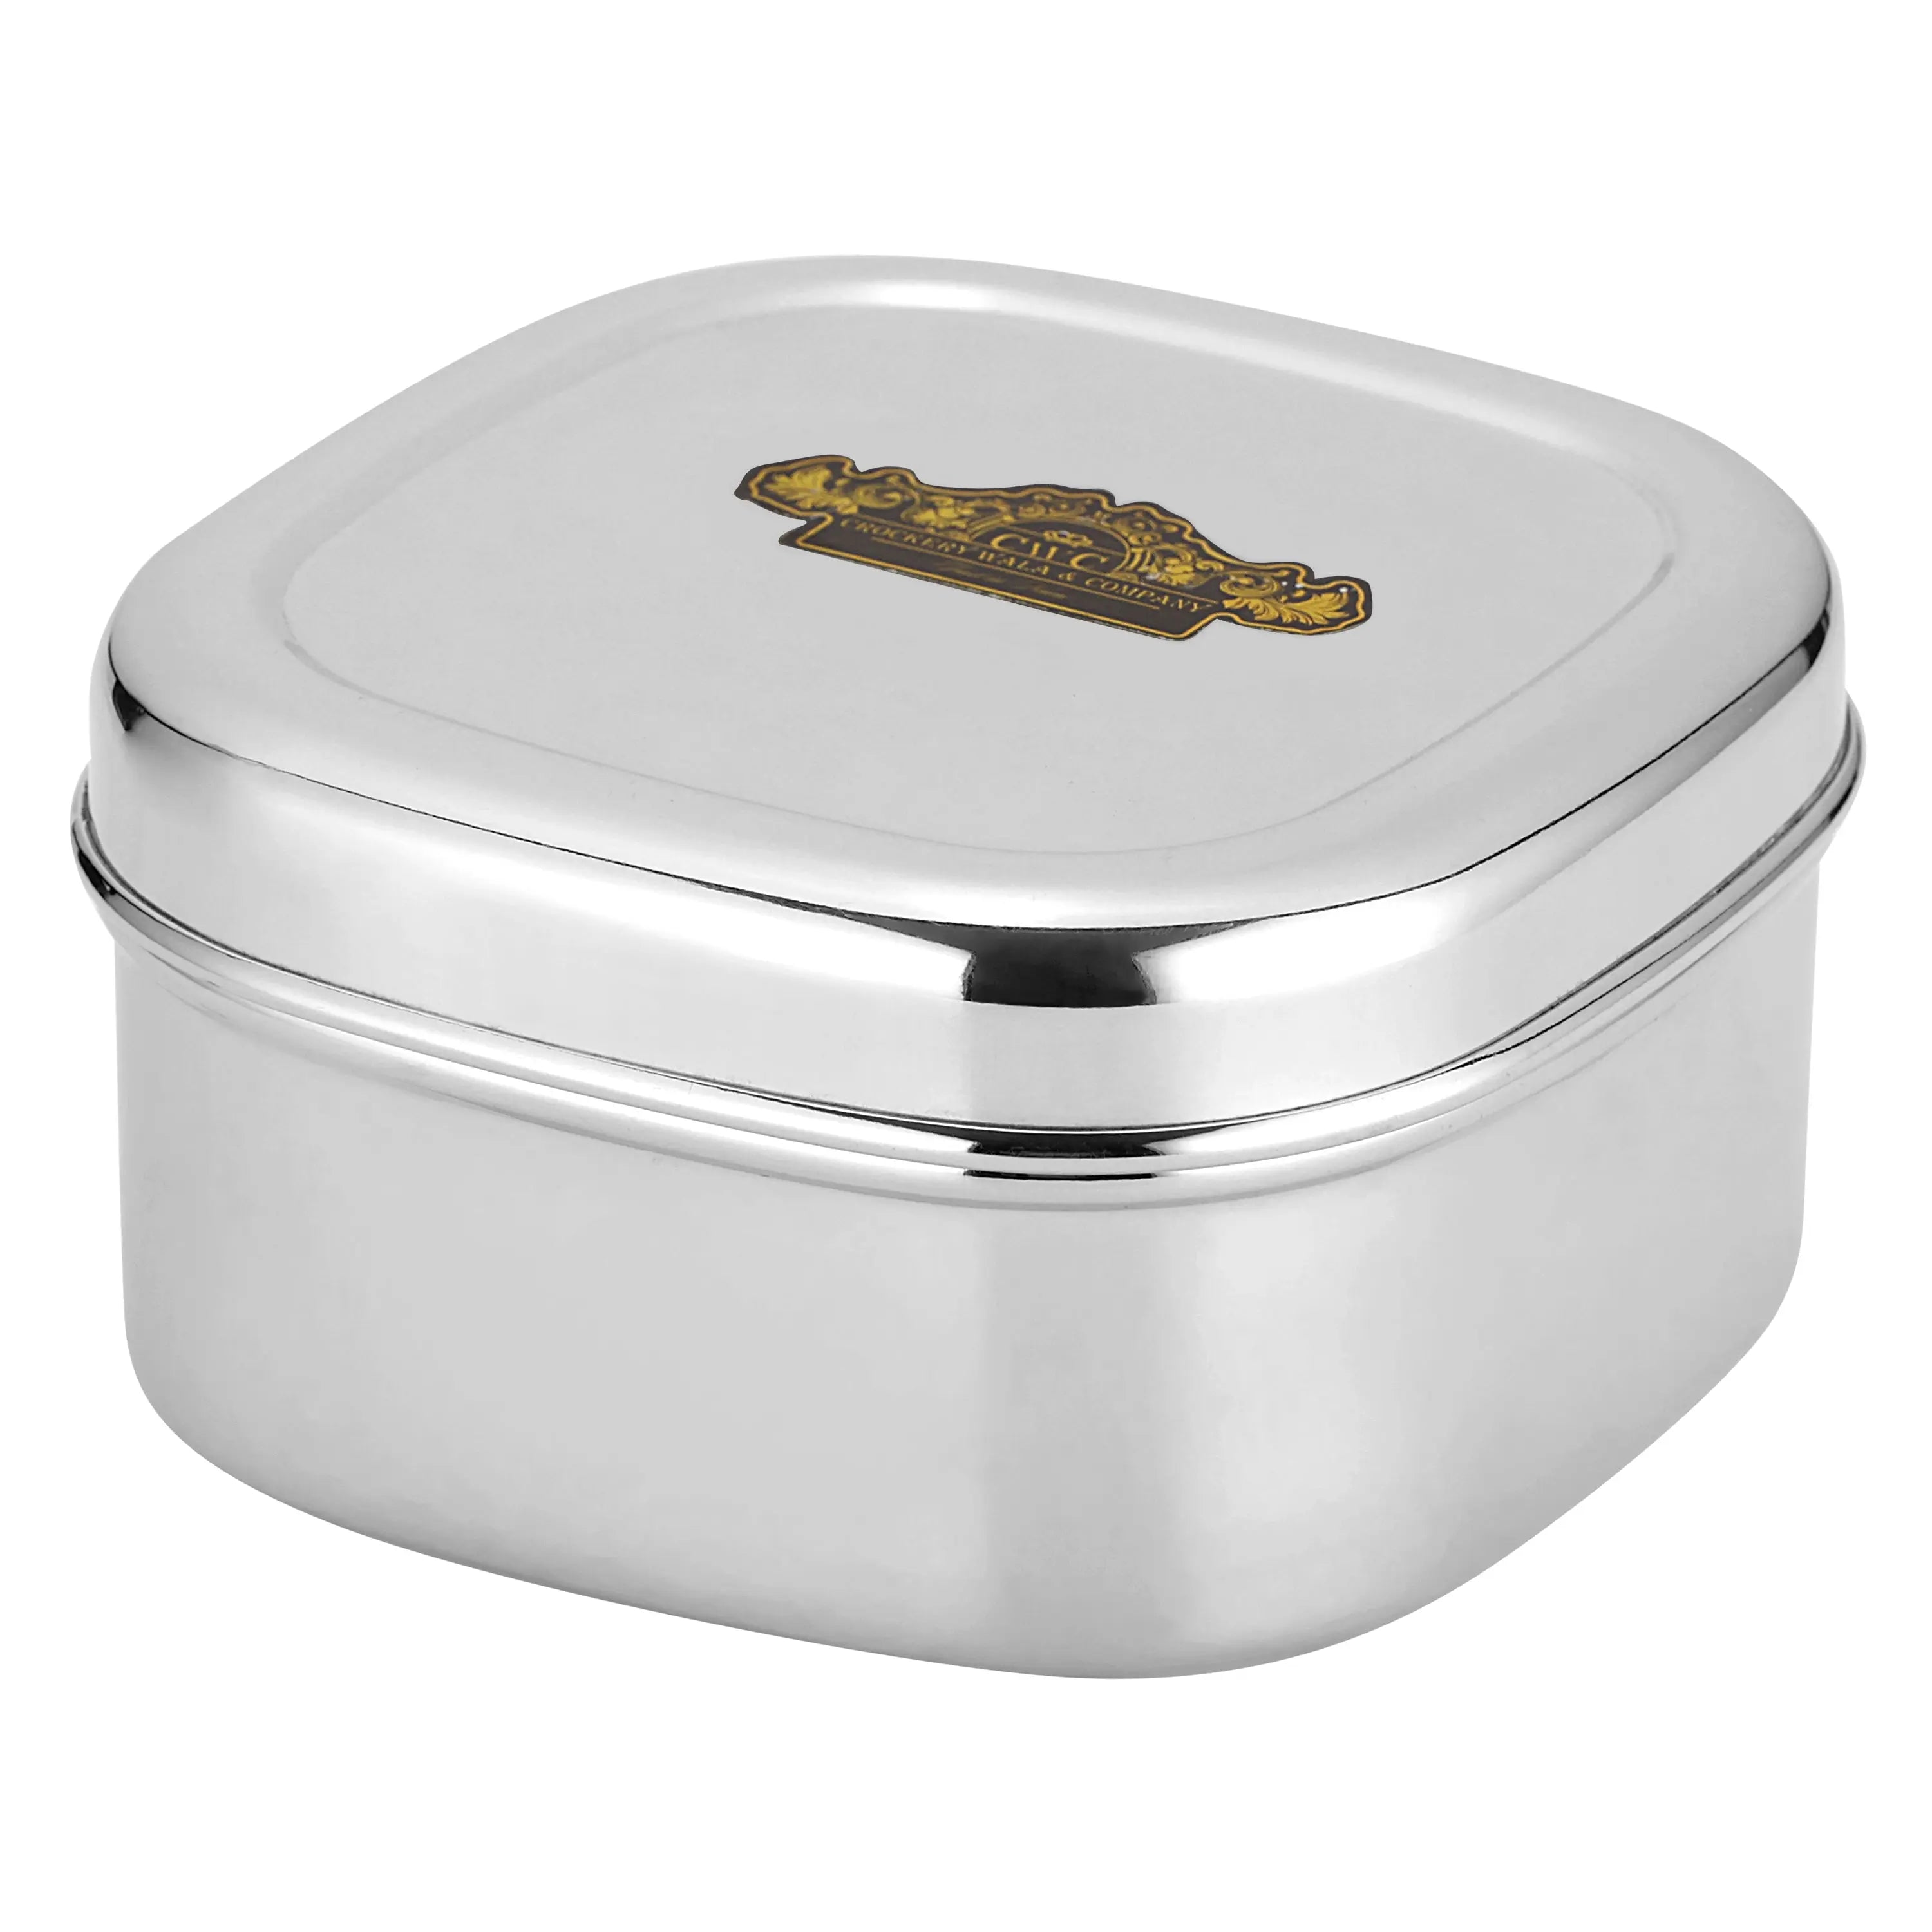 STAINLESS STEEL SQUARE POT - CROCKERY WALA AND COMPANY 